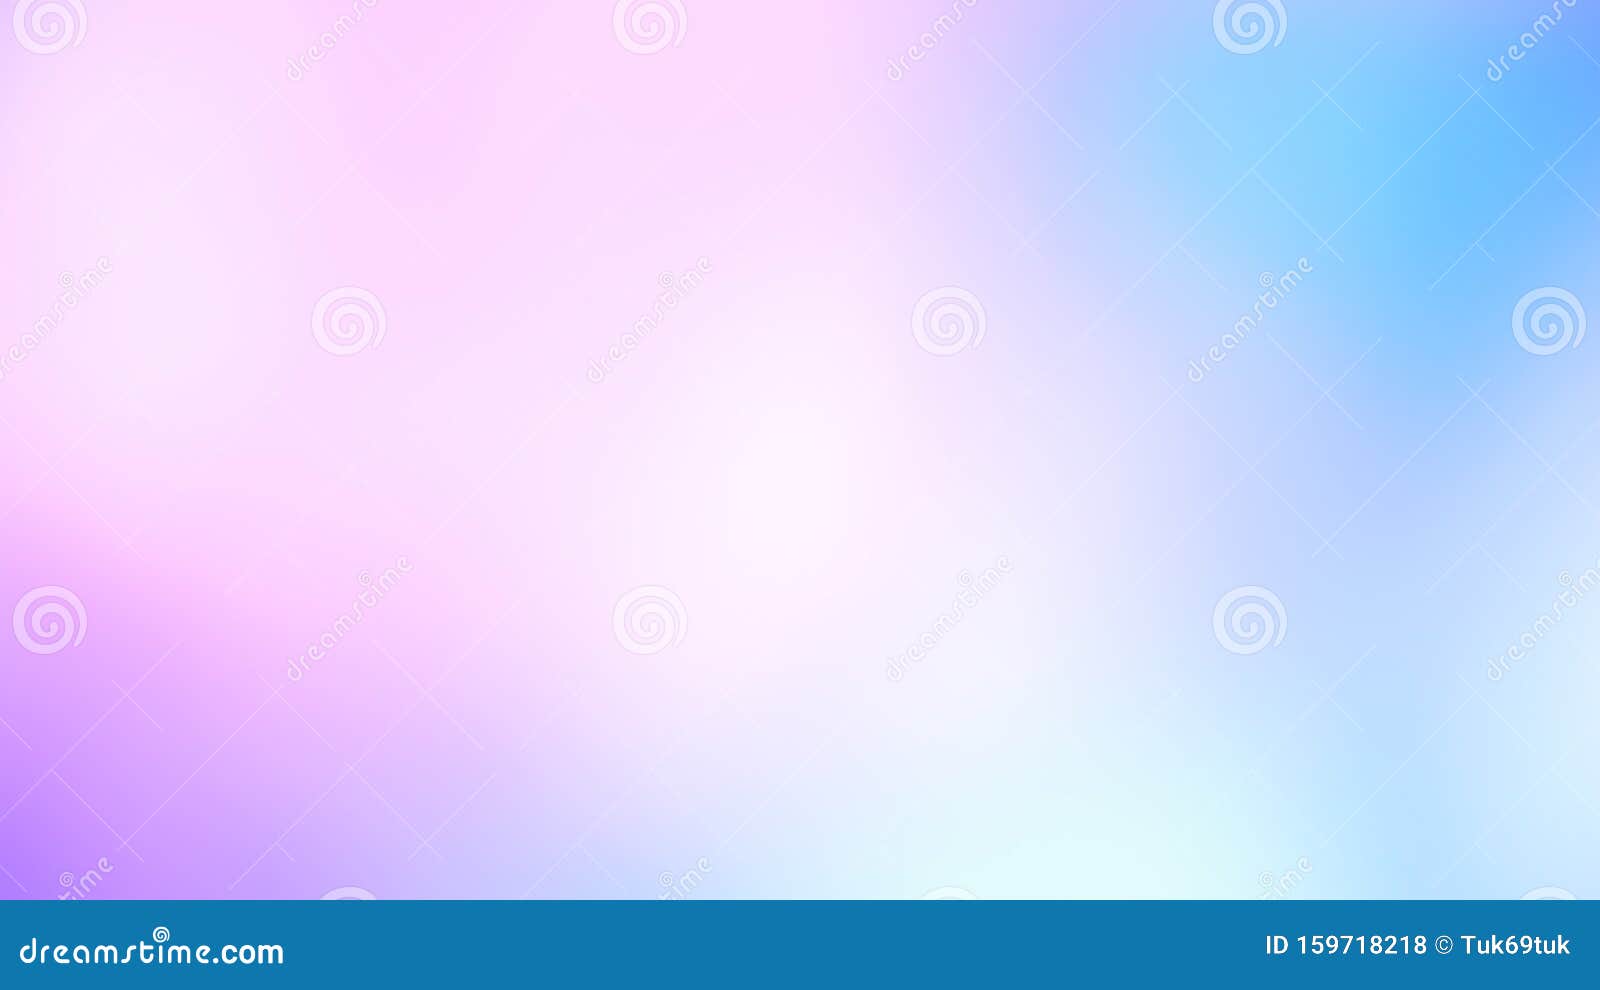 Pastel Tone Purple Pink Blue Gradient Defocused Abstract Photo Smooth Lines Pantone Color Background Stock Photo Image Of Bright Abstract